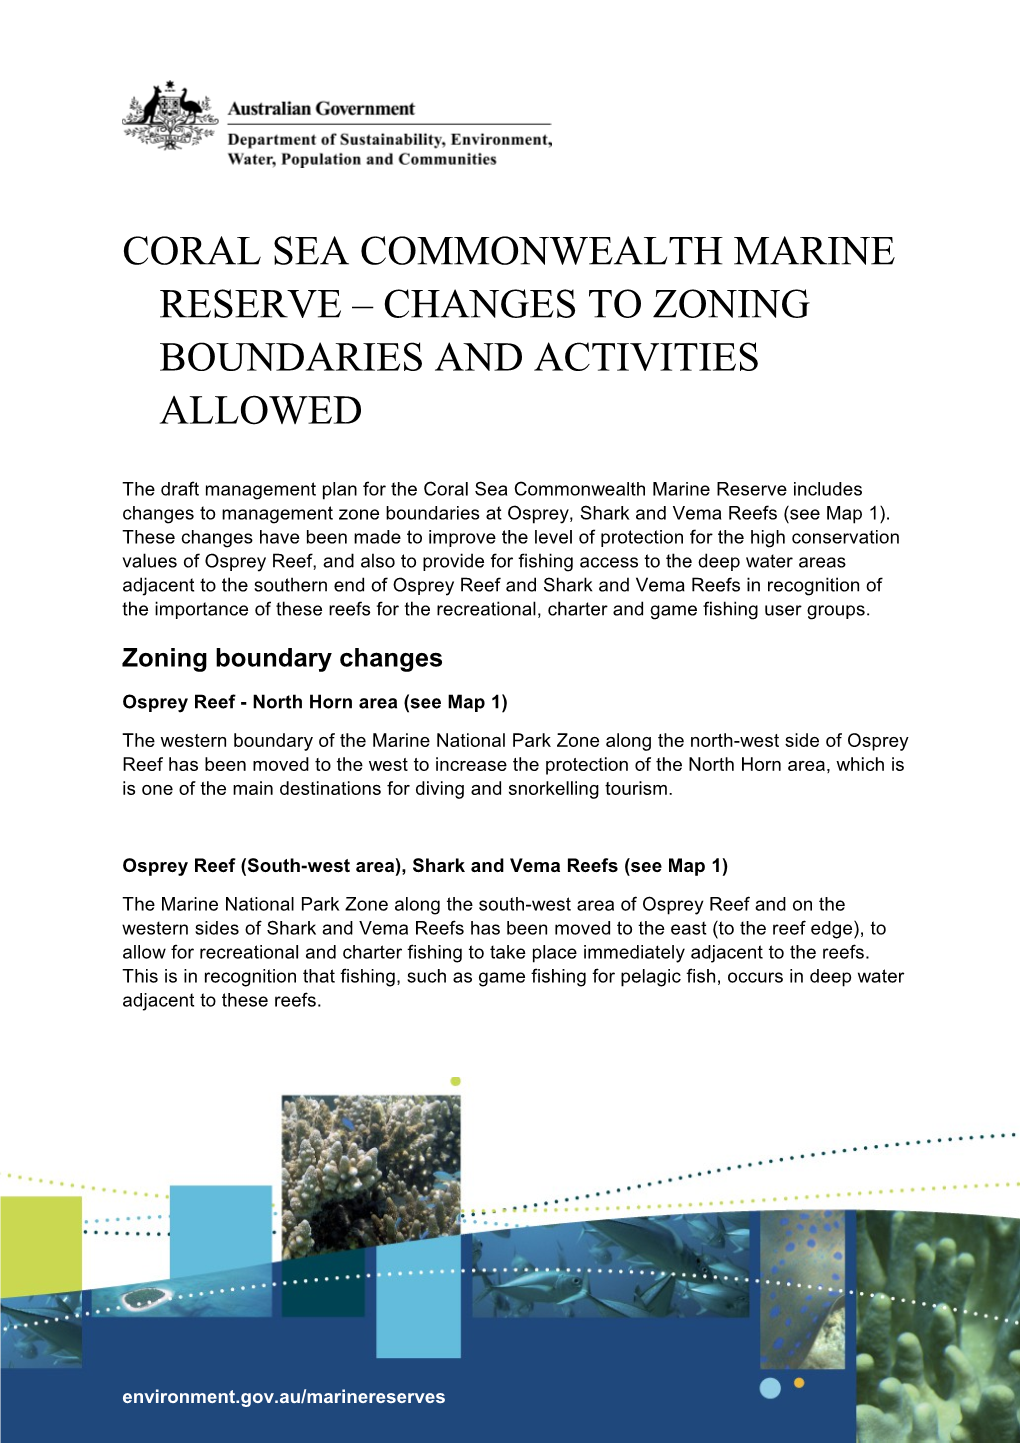 Coral Sea Commonwealth Marine Reserve Changes to Zoning Boundaries and Activities Allowed